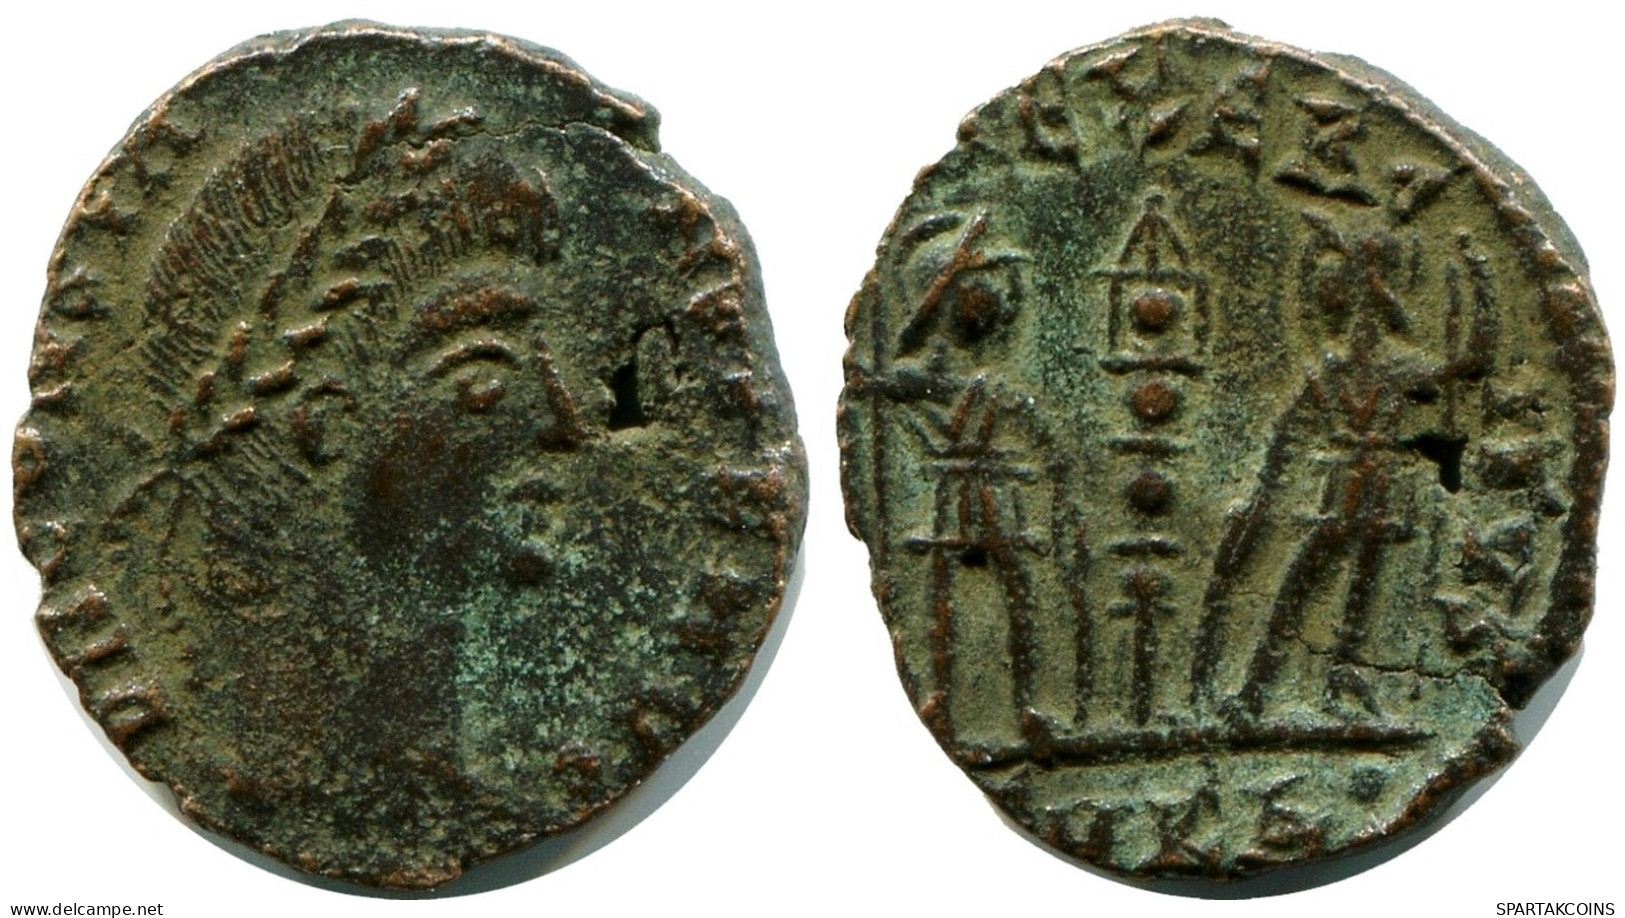 CONSTANS MINTED IN CYZICUS FOUND IN IHNASYAH HOARD EGYPT #ANC11660.14.U.A - The Christian Empire (307 AD To 363 AD)